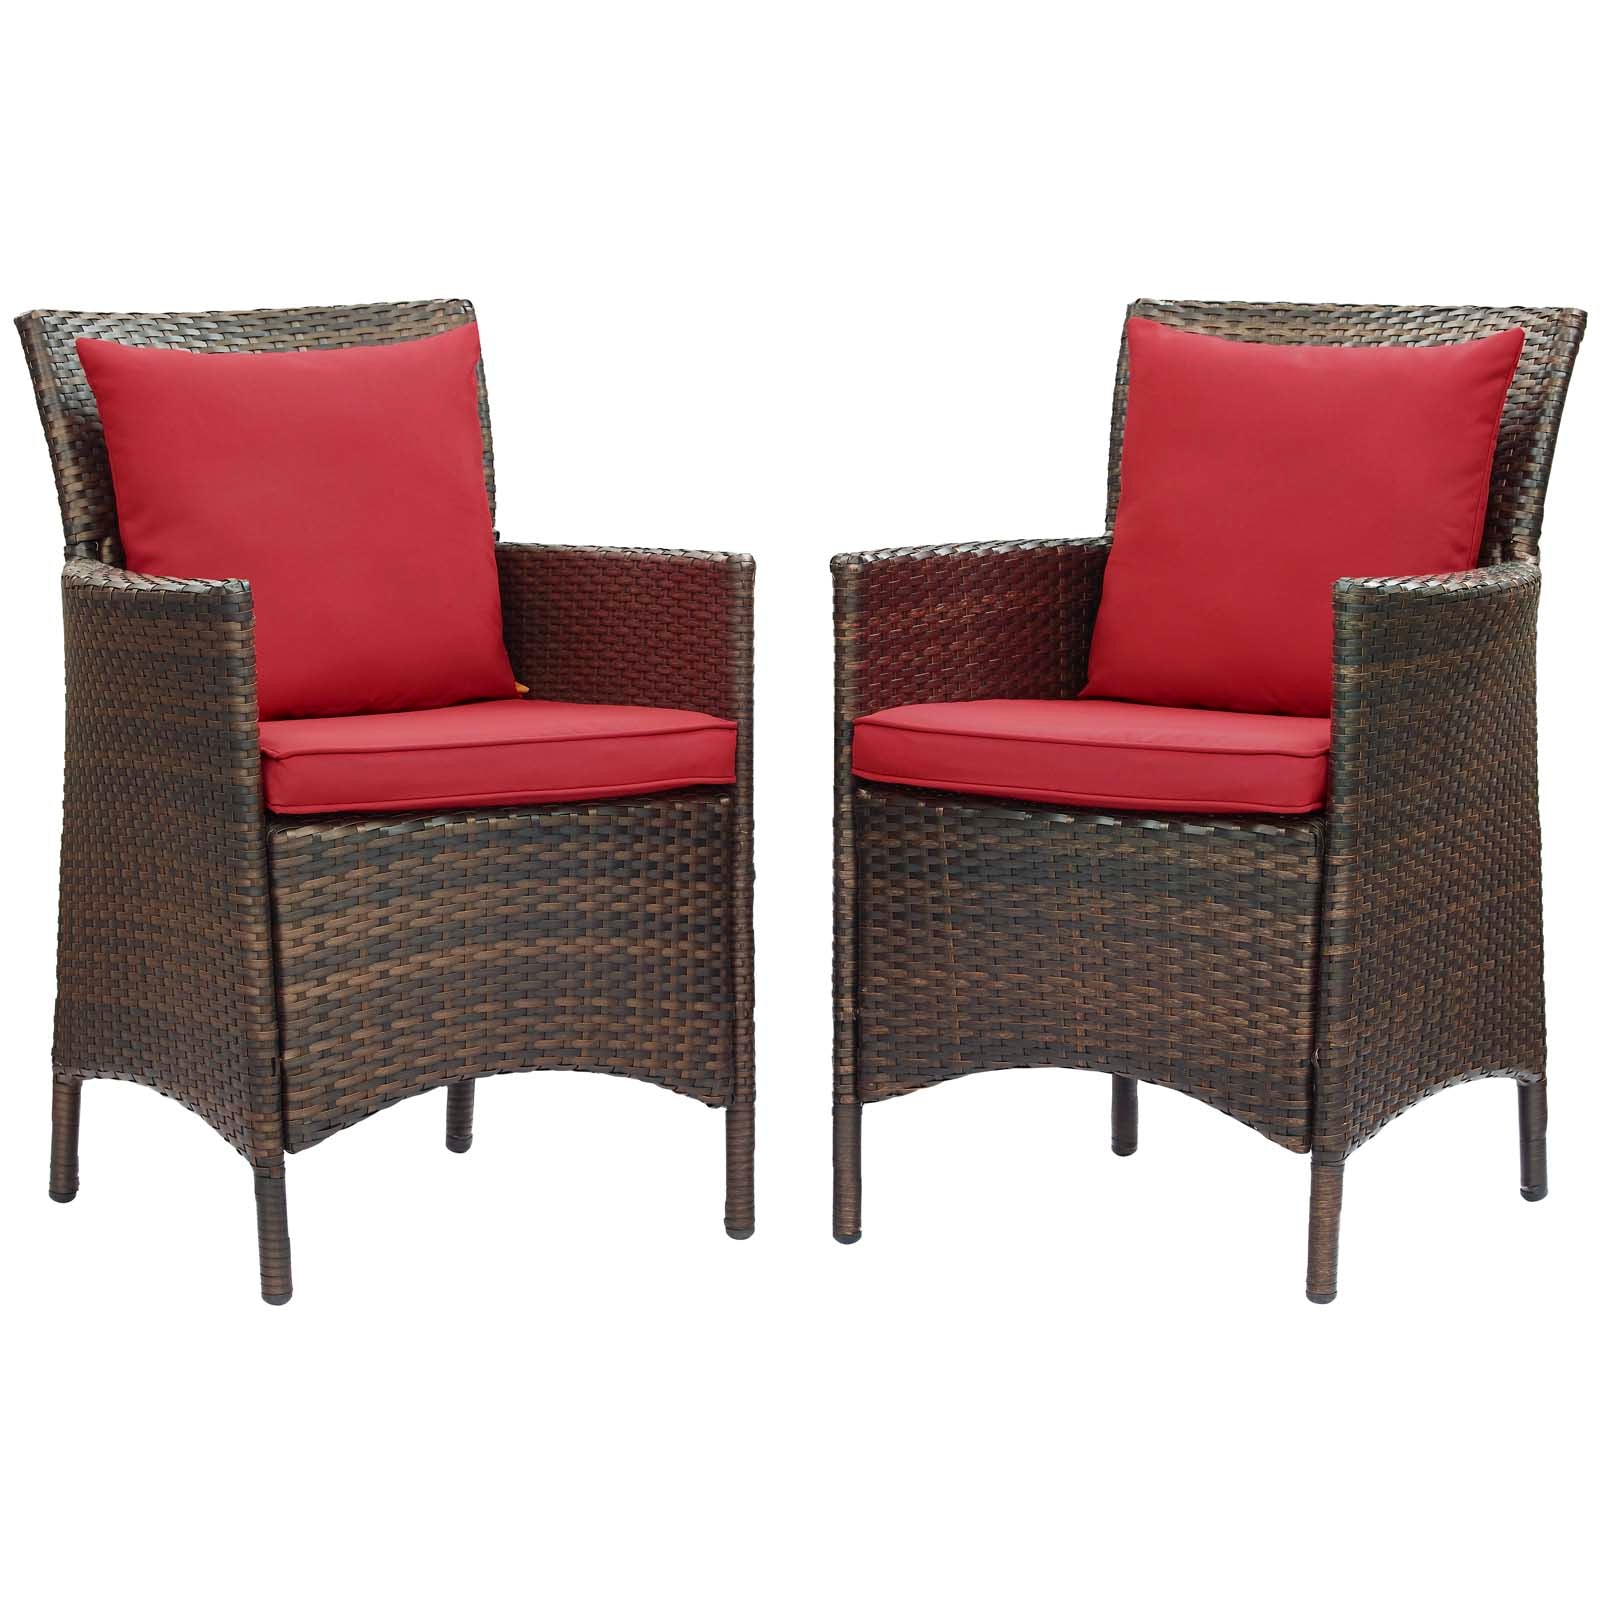 Modway Outdoor Dining Chairs - Conduit Outdoor Patio Wicker Rattan Dining Armchair Set of 2 Brown Red